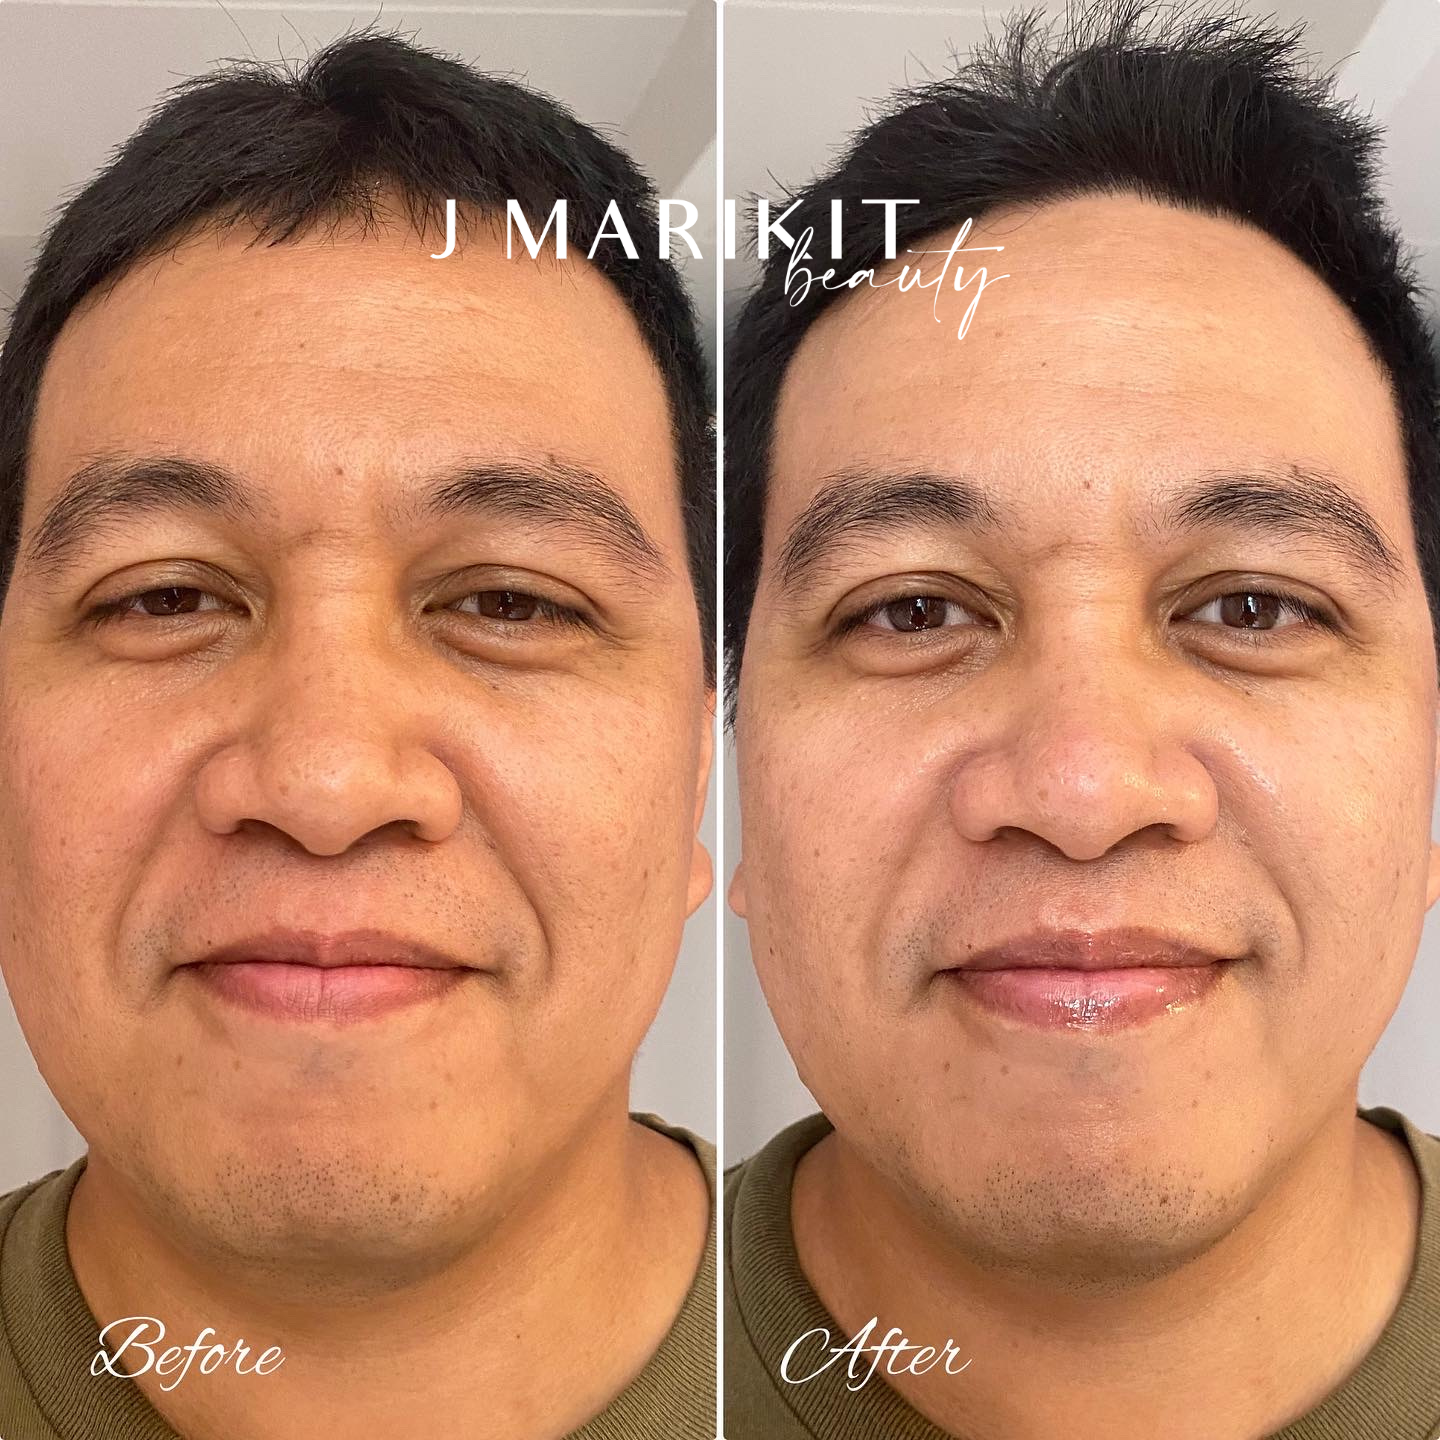 Client before and after images of skin therapy services provided by JMarkit